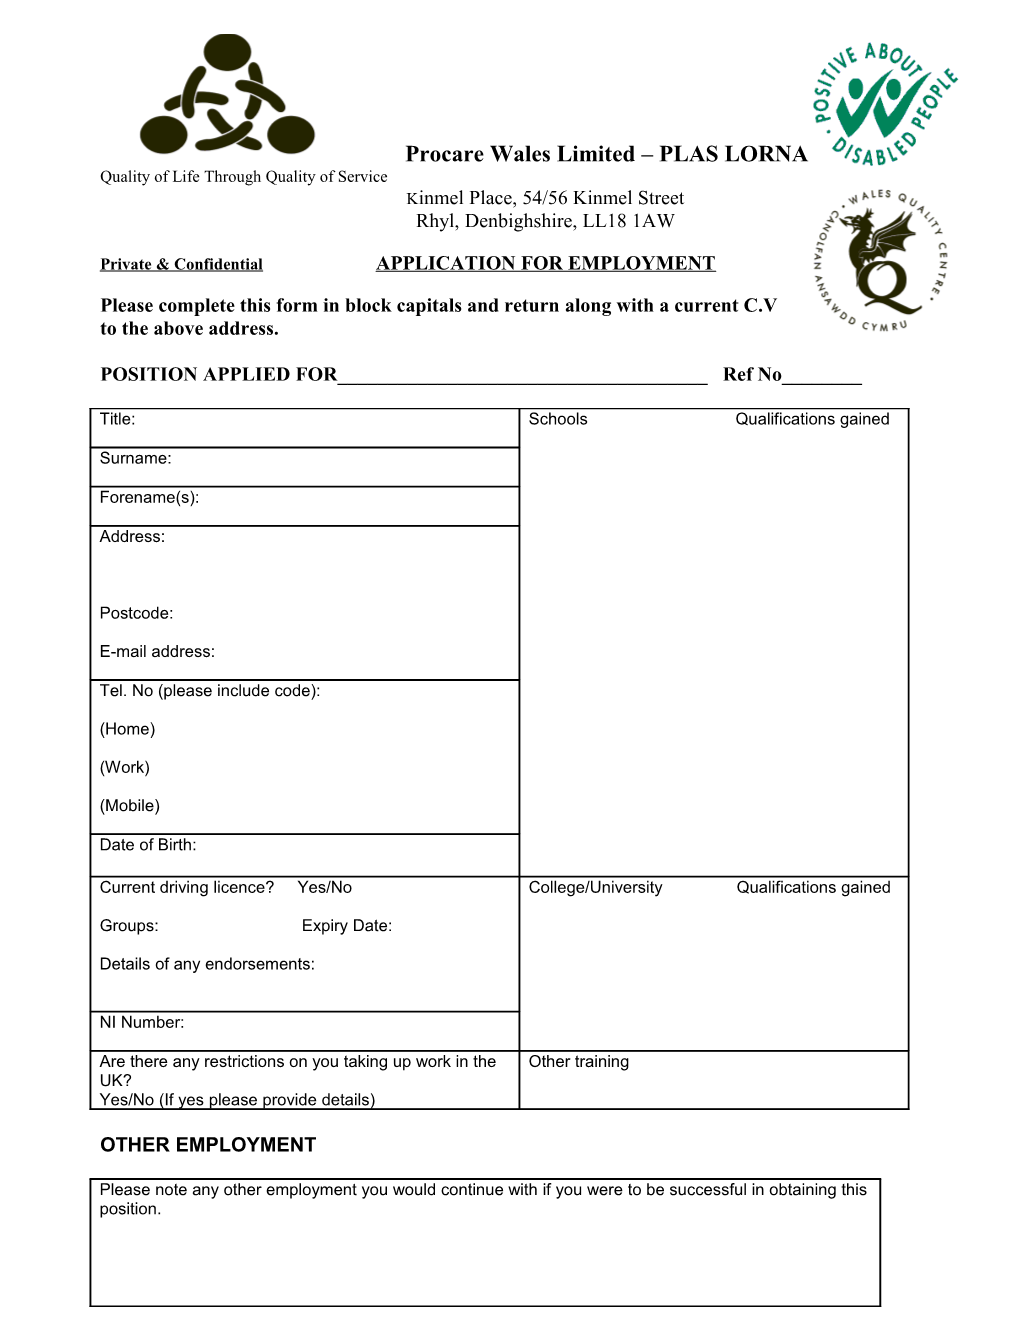 Private & Confidential APPLICATION for EMPLOYMENT